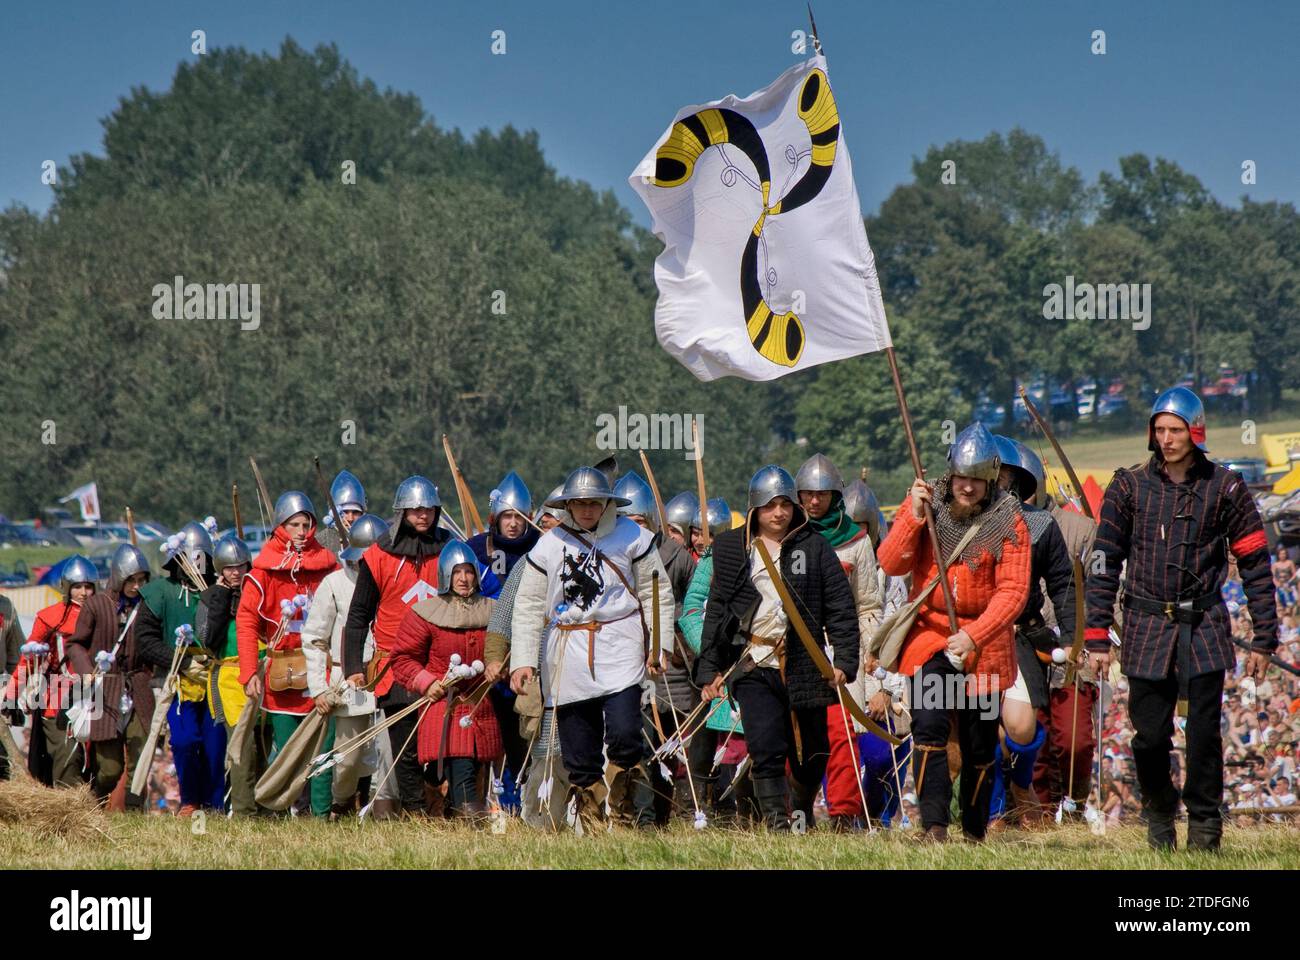 Reenactors leaving battlefield after recreating Battle of Grunwald which took place in 1410 when Polish and Lithuanian troops broke the power of Teutonic Knights, near village of Grunwald Warminsko-Mazurskie, Poland Stock Photo